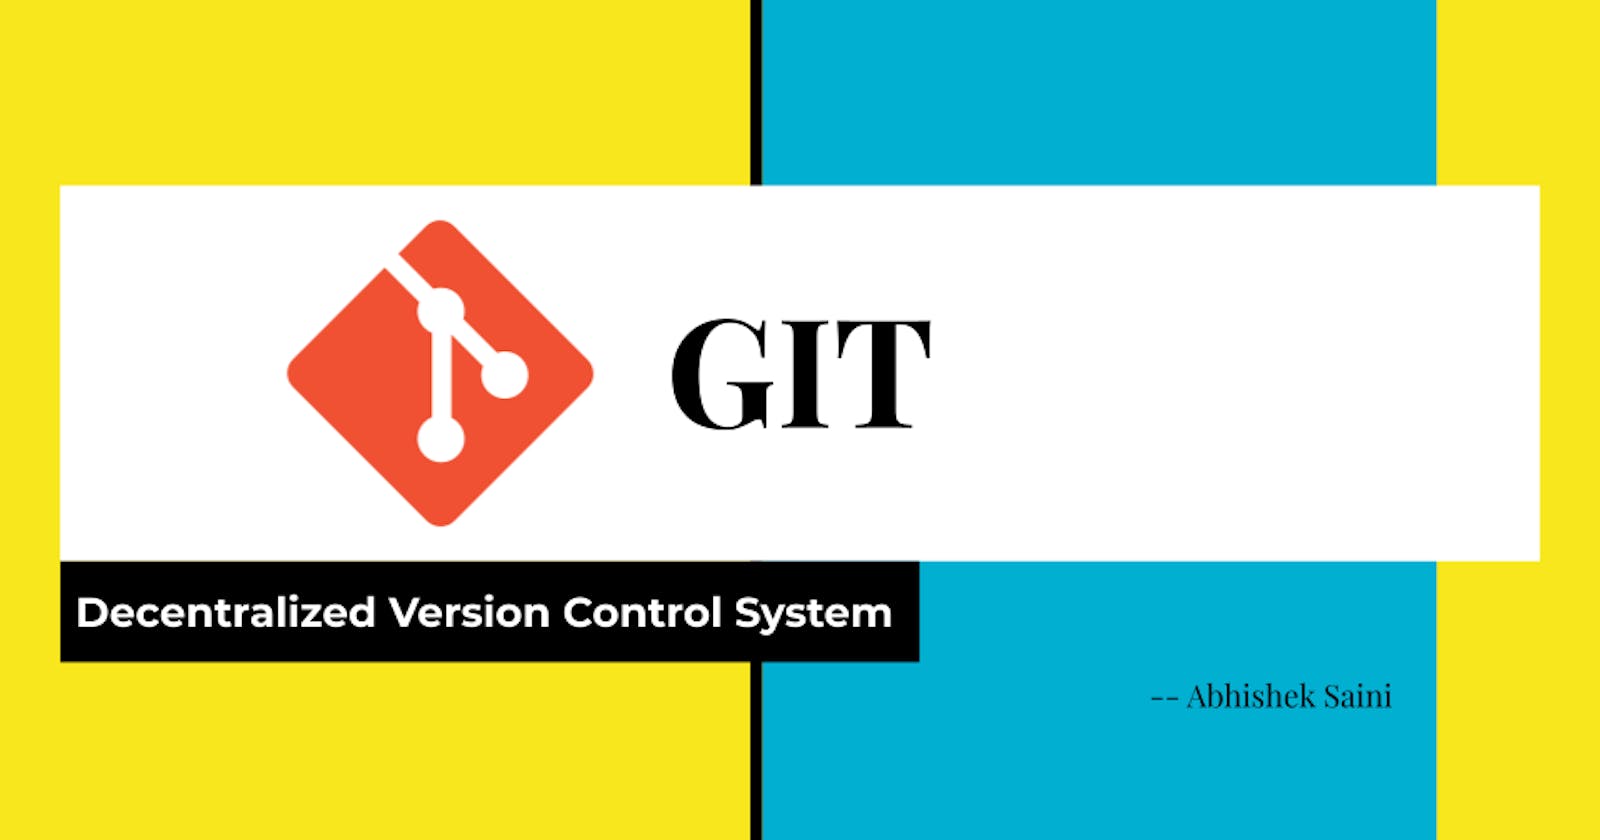 What is Version Control System?